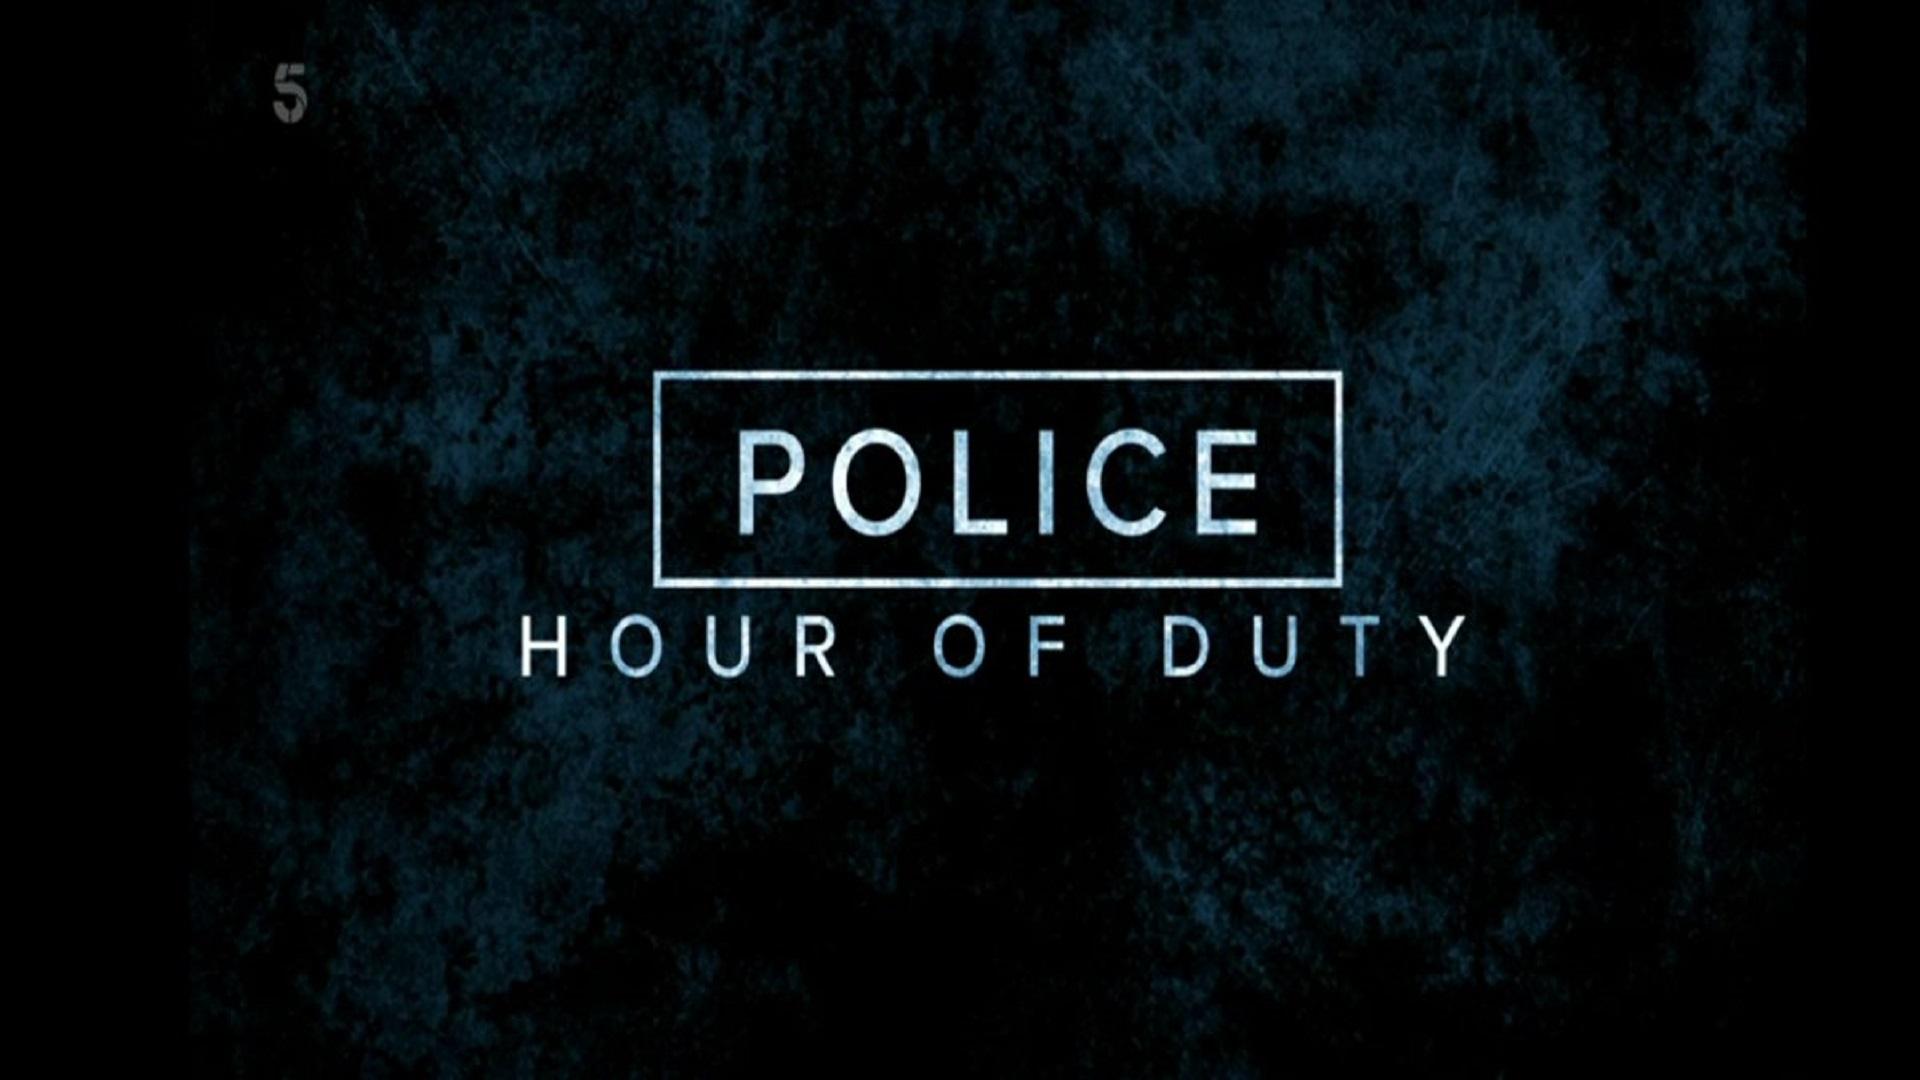 Police: Hour of Duty